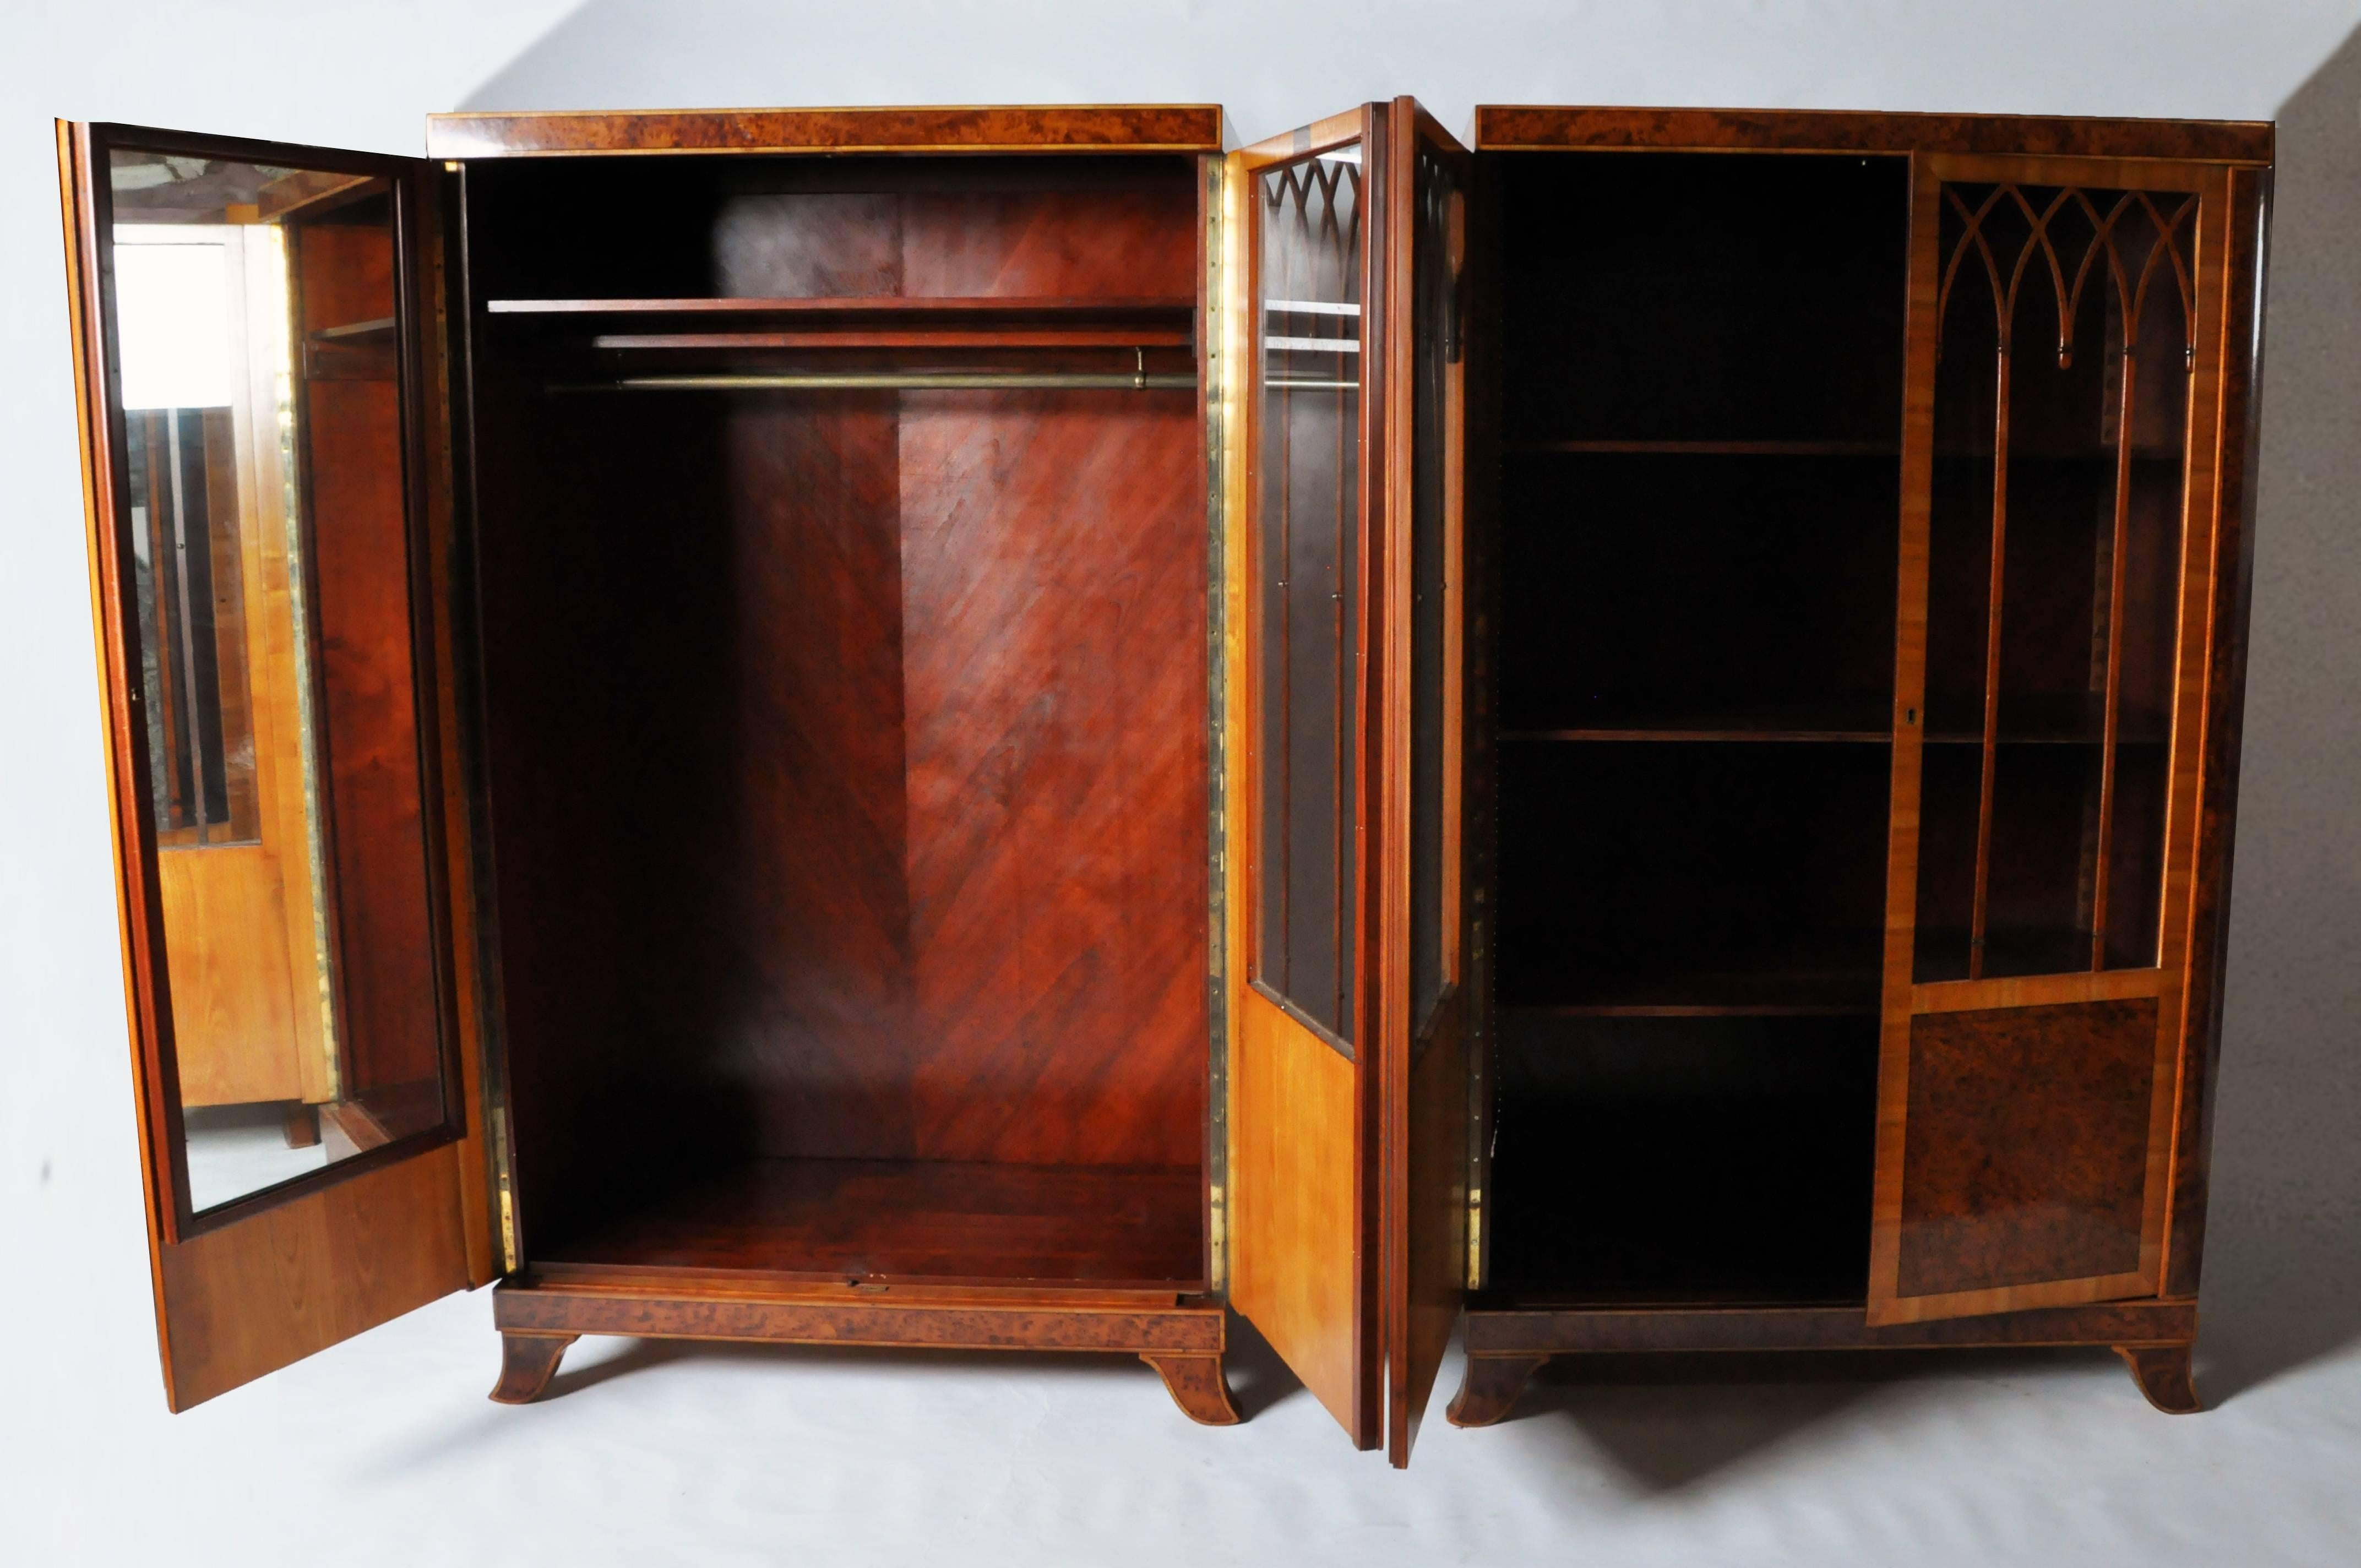 In 1864, Károly Lingel and Sons Lumbergoods and furniture factory opened its doors, however it wasn’t until the early 20th century that they began producing furniture. These exquisite cabinets feature pairs of glazed doors with handsomely detailed